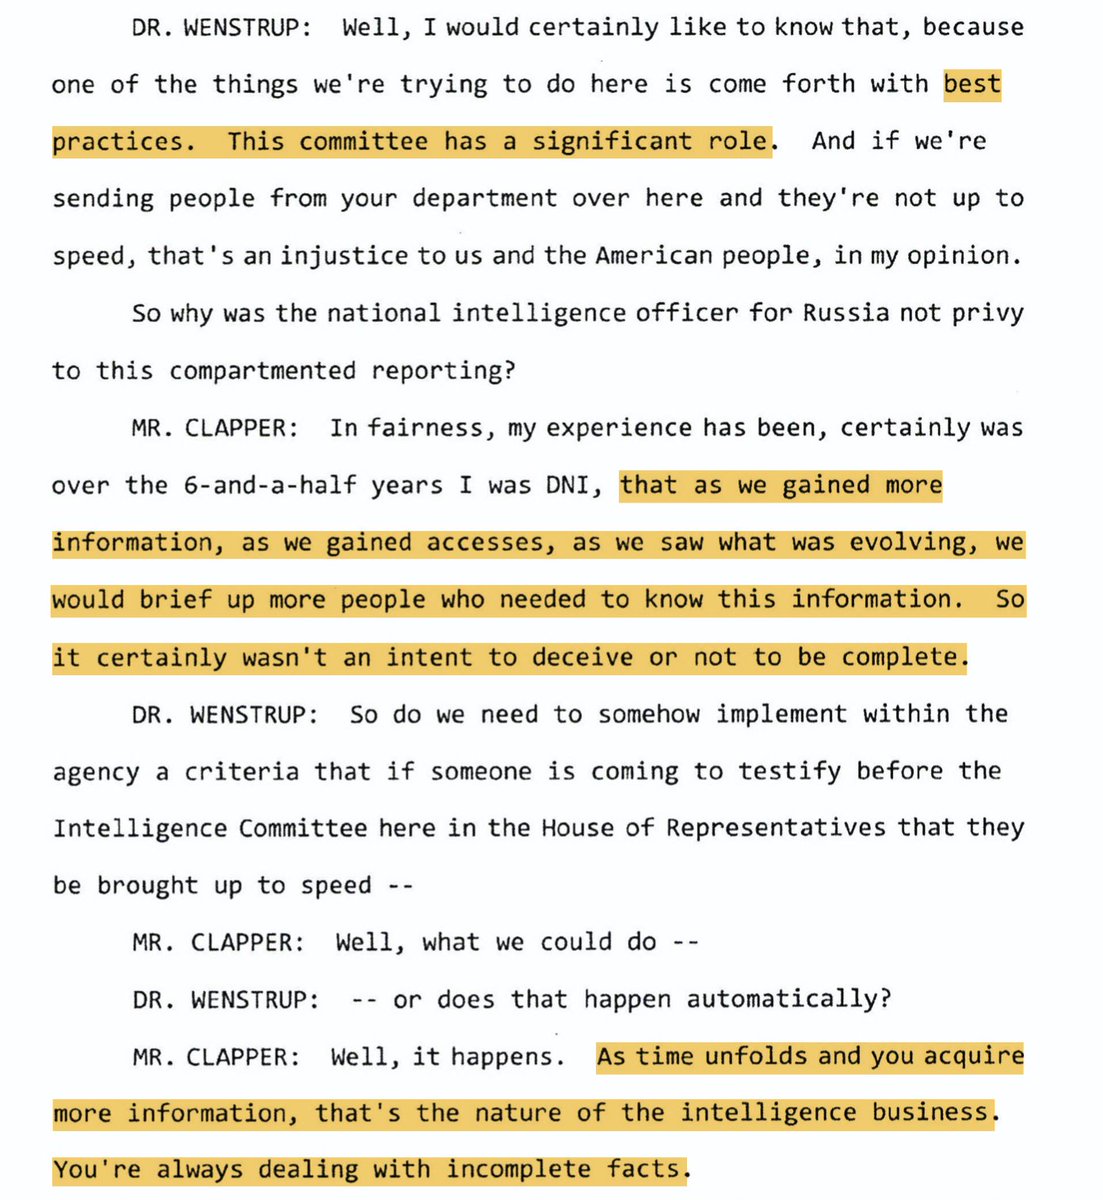 WENSTRUP: Well, it's our job to tell you how to intelligence better. CLAPPER: Yes. You're a podiatrist and I was piloting intelligence missions when you were 4. I can't wait.